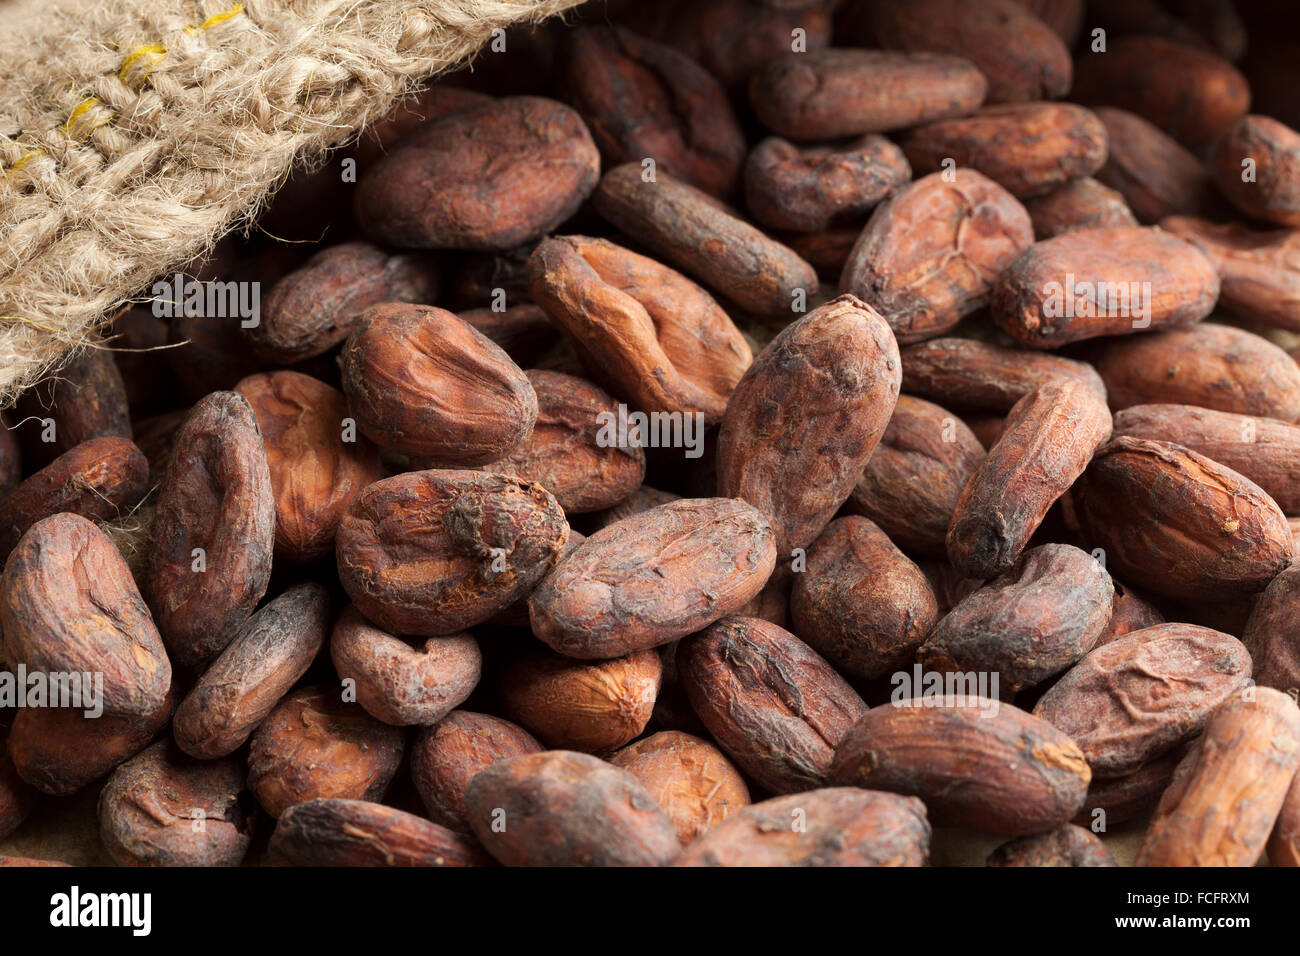 Jute bag full with raw cocoa beans Stock Photo